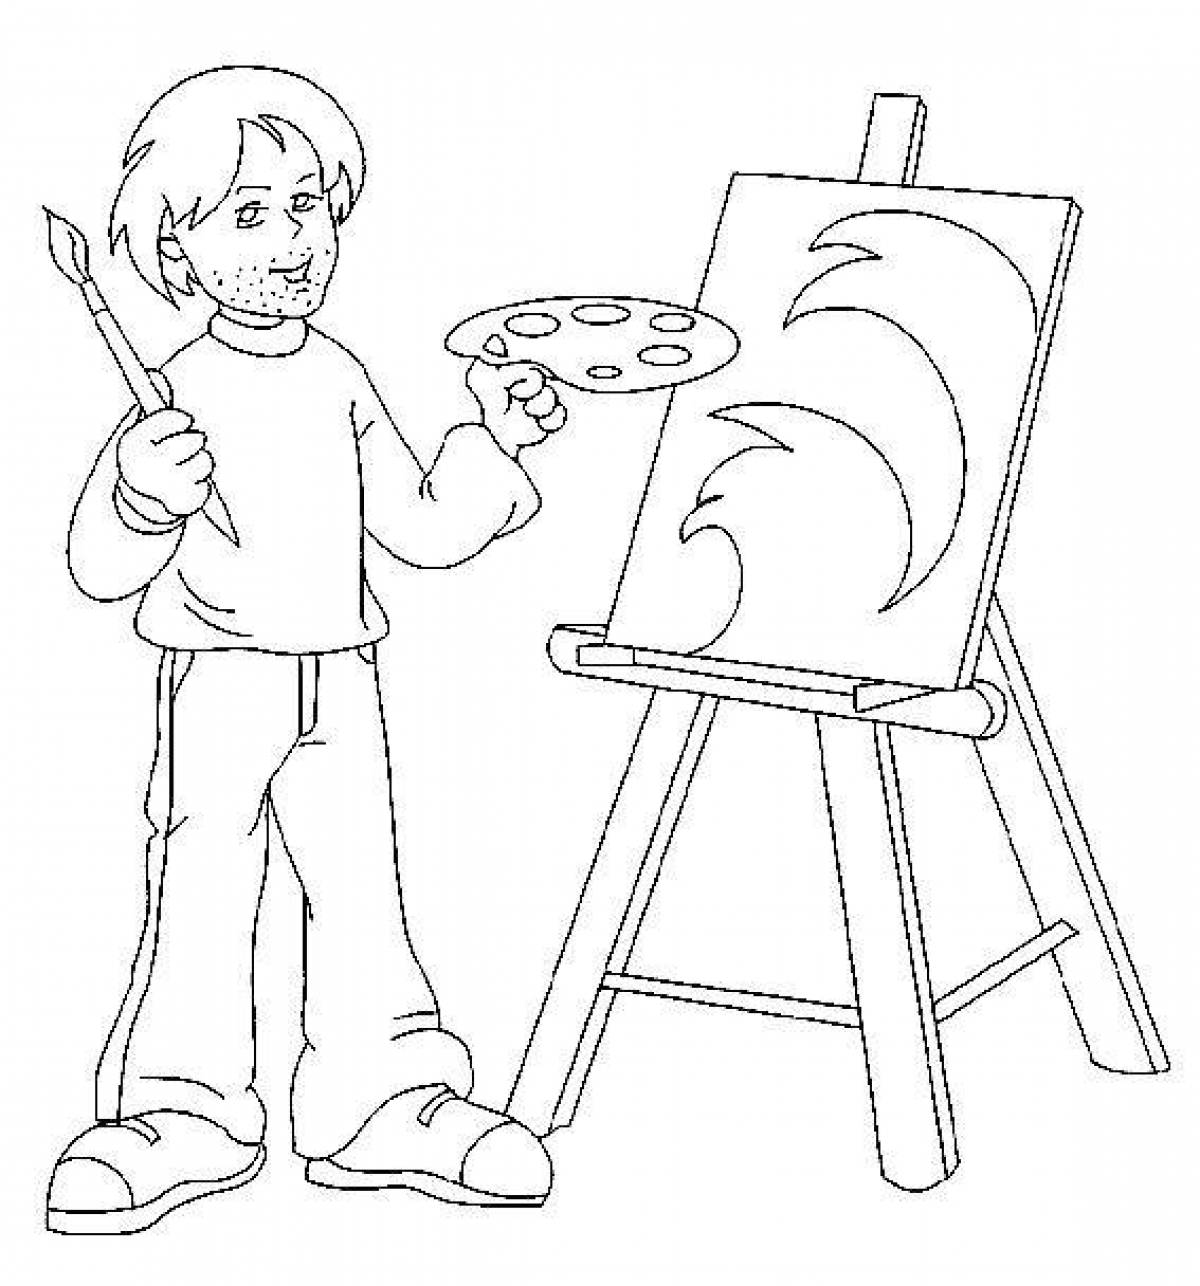 Color-frenzy coloring page work